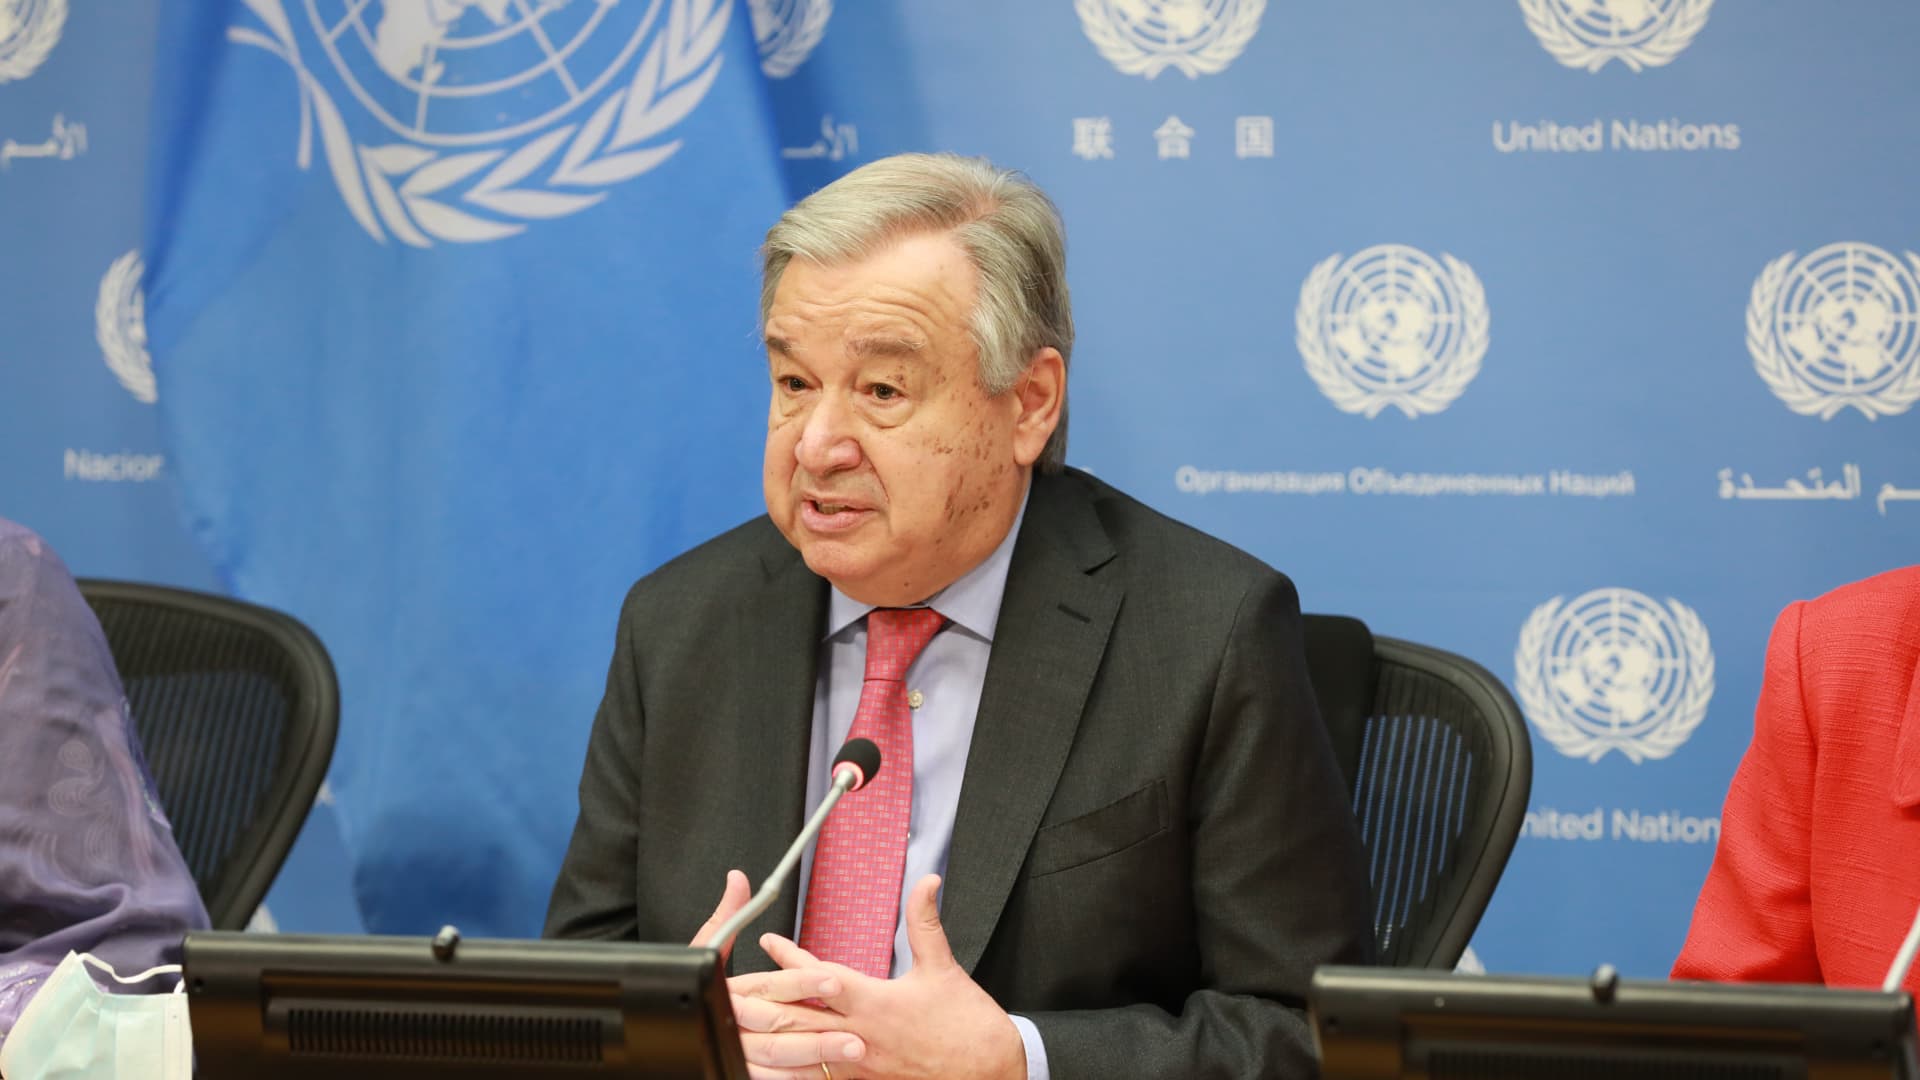 U.N. Secretary-General Antonio Guterres speaks to the media at the U.N. headquarters in New York, April 13, 2022. Guterres on Monday called for an immediate humanitarian ceasefire between Russia and Ukraine to secure humanitarian corridors for evacuation and delivering of aid and medical assistance.